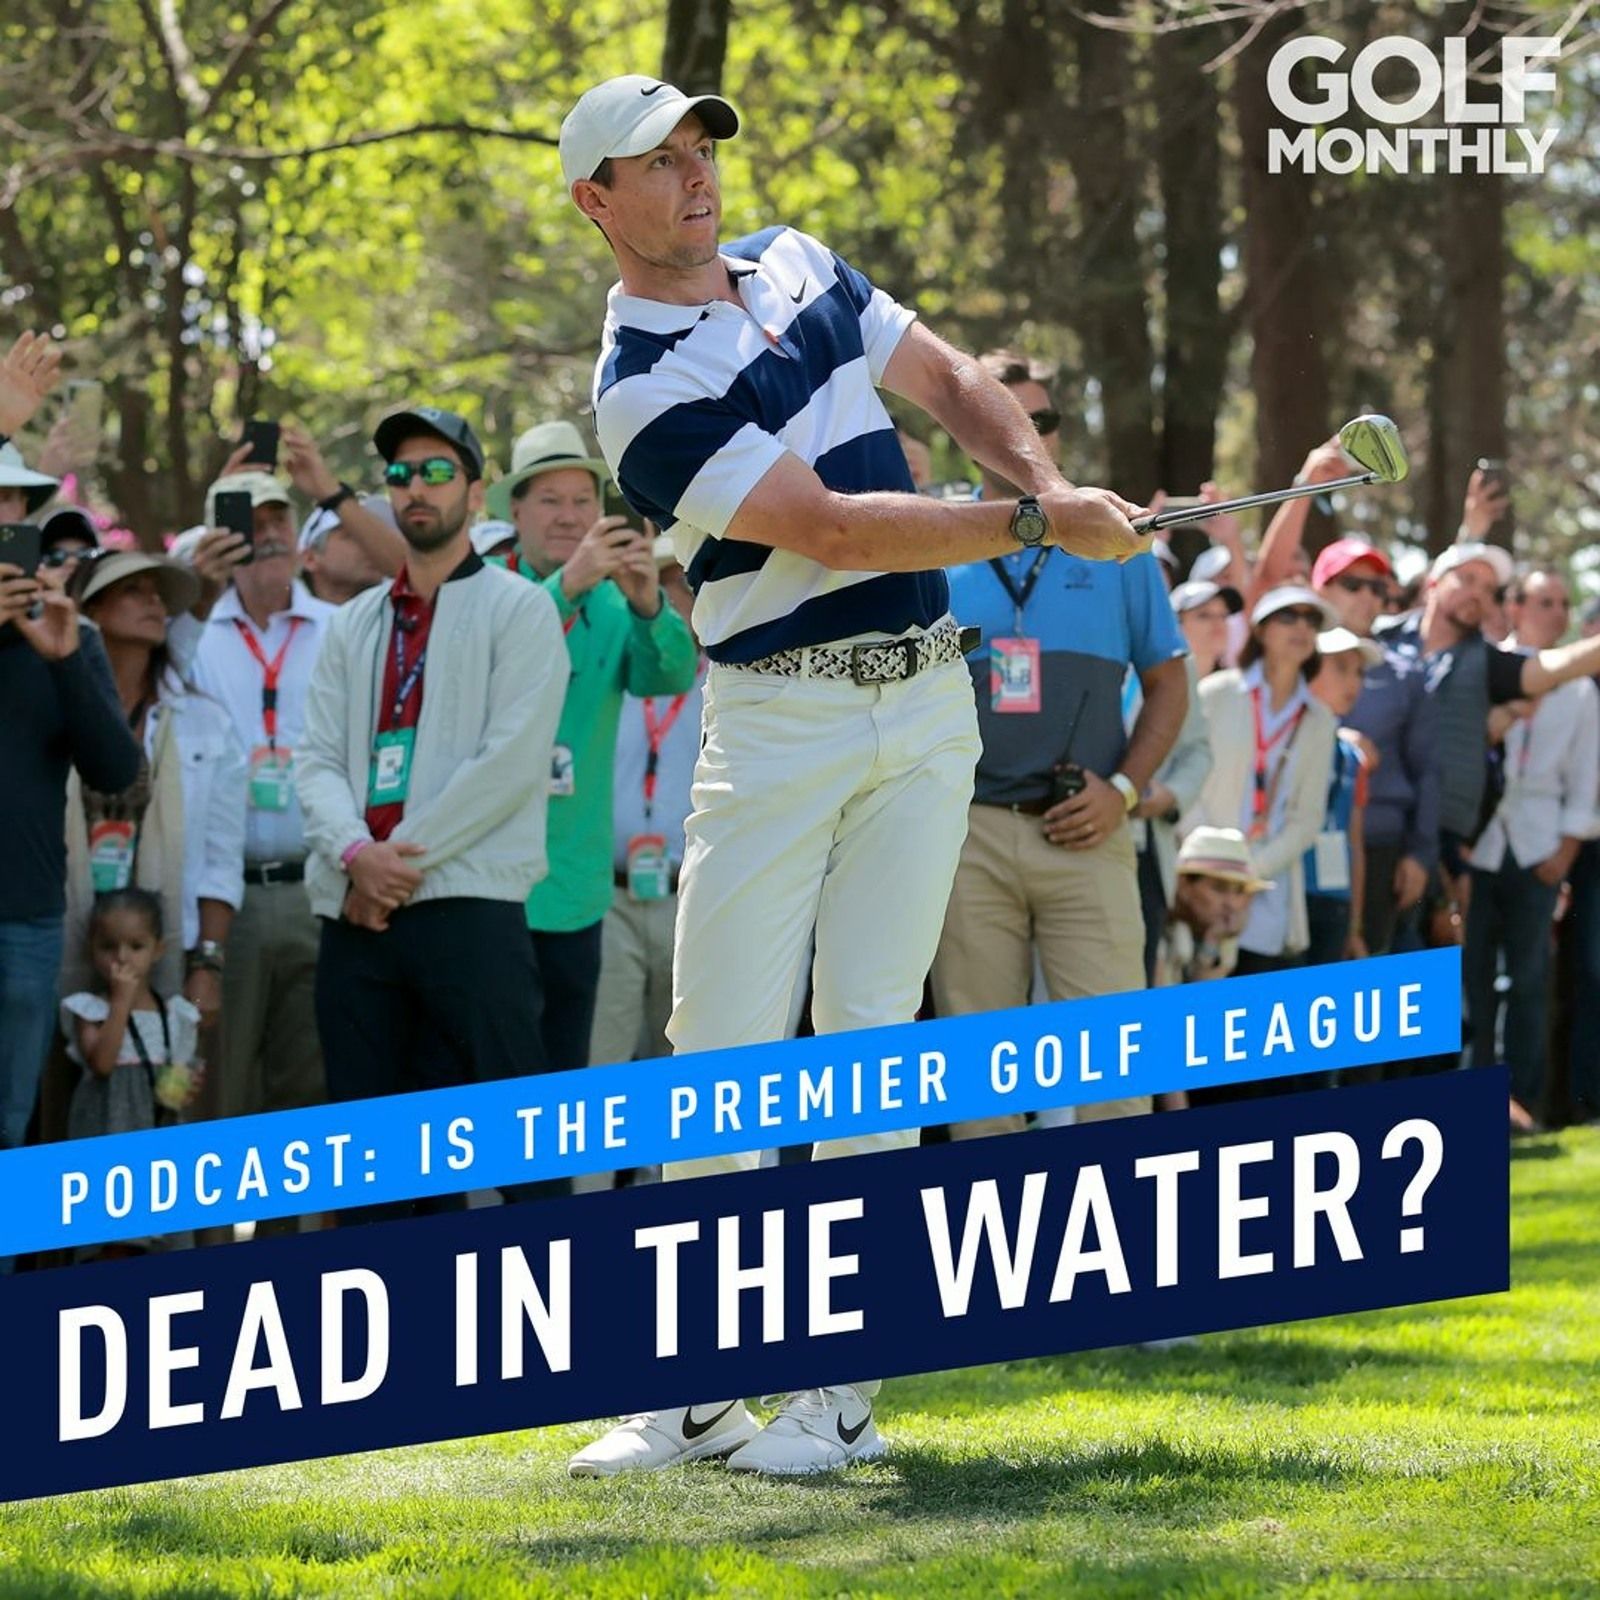 Is The Premier Golf League Dead In The Water?